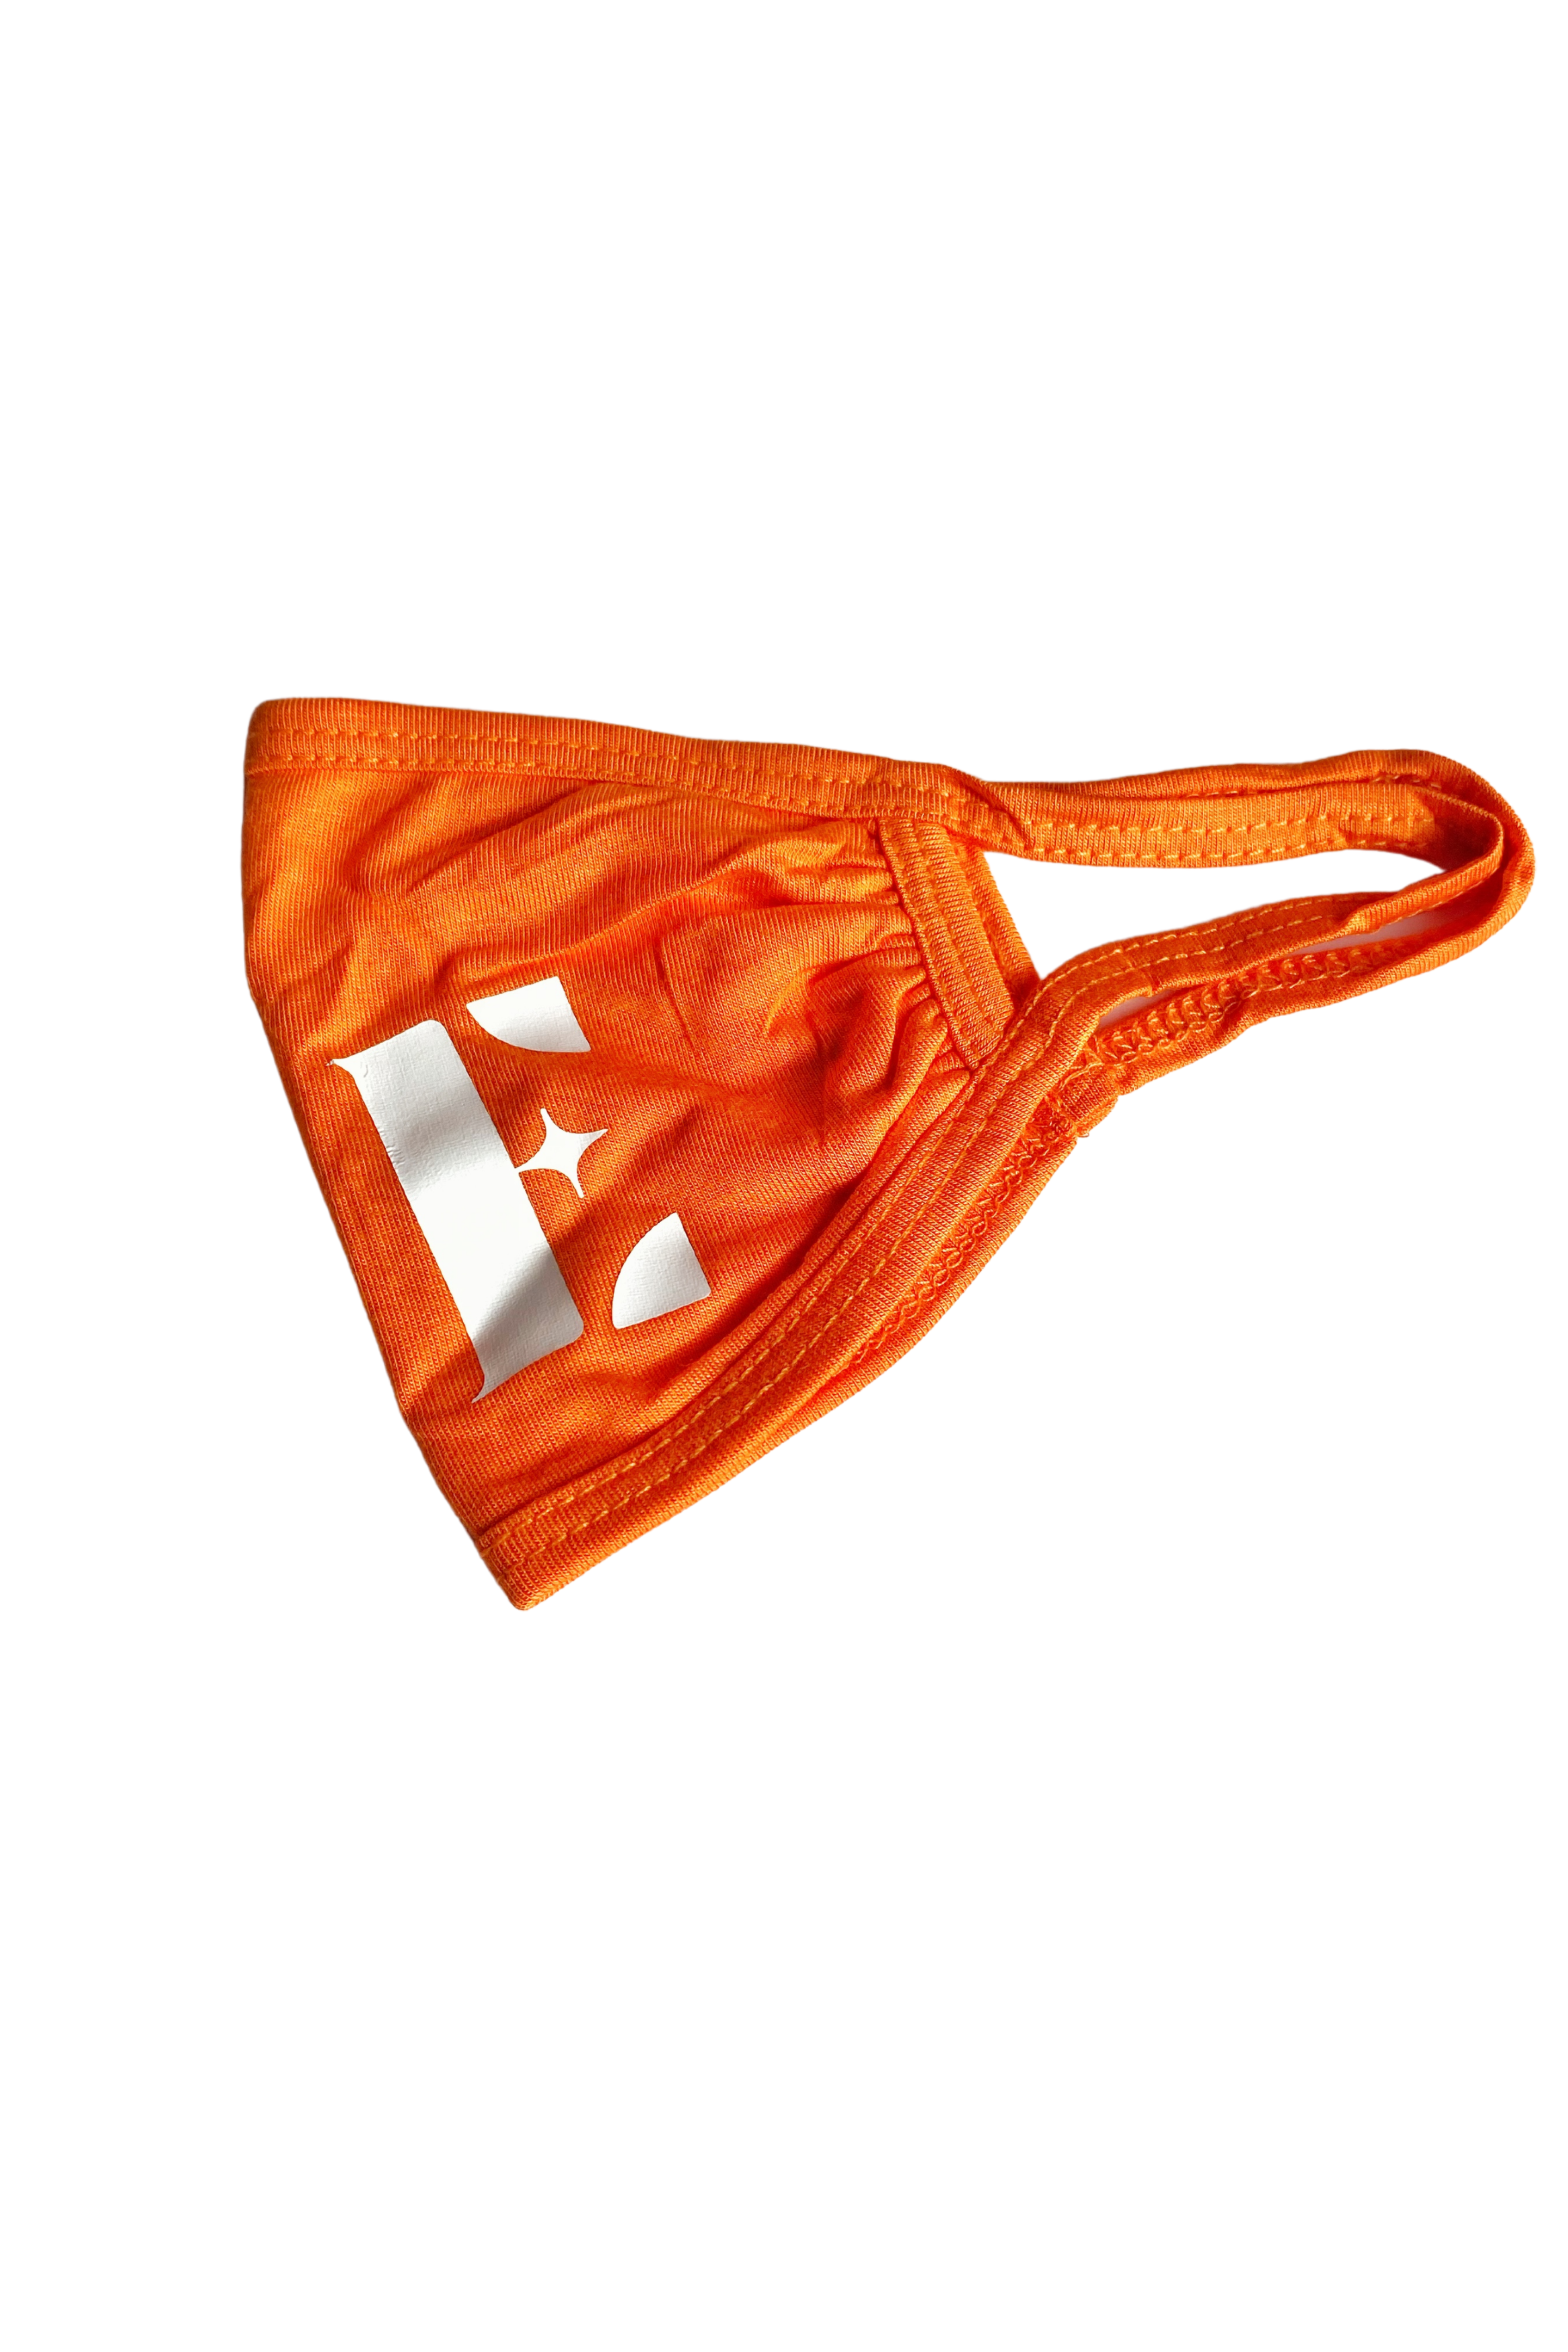 Bright orange reusable face mask. The mask is imprinted with the E's Element logo in white. Burnt Orange Face Mask by E's Element.